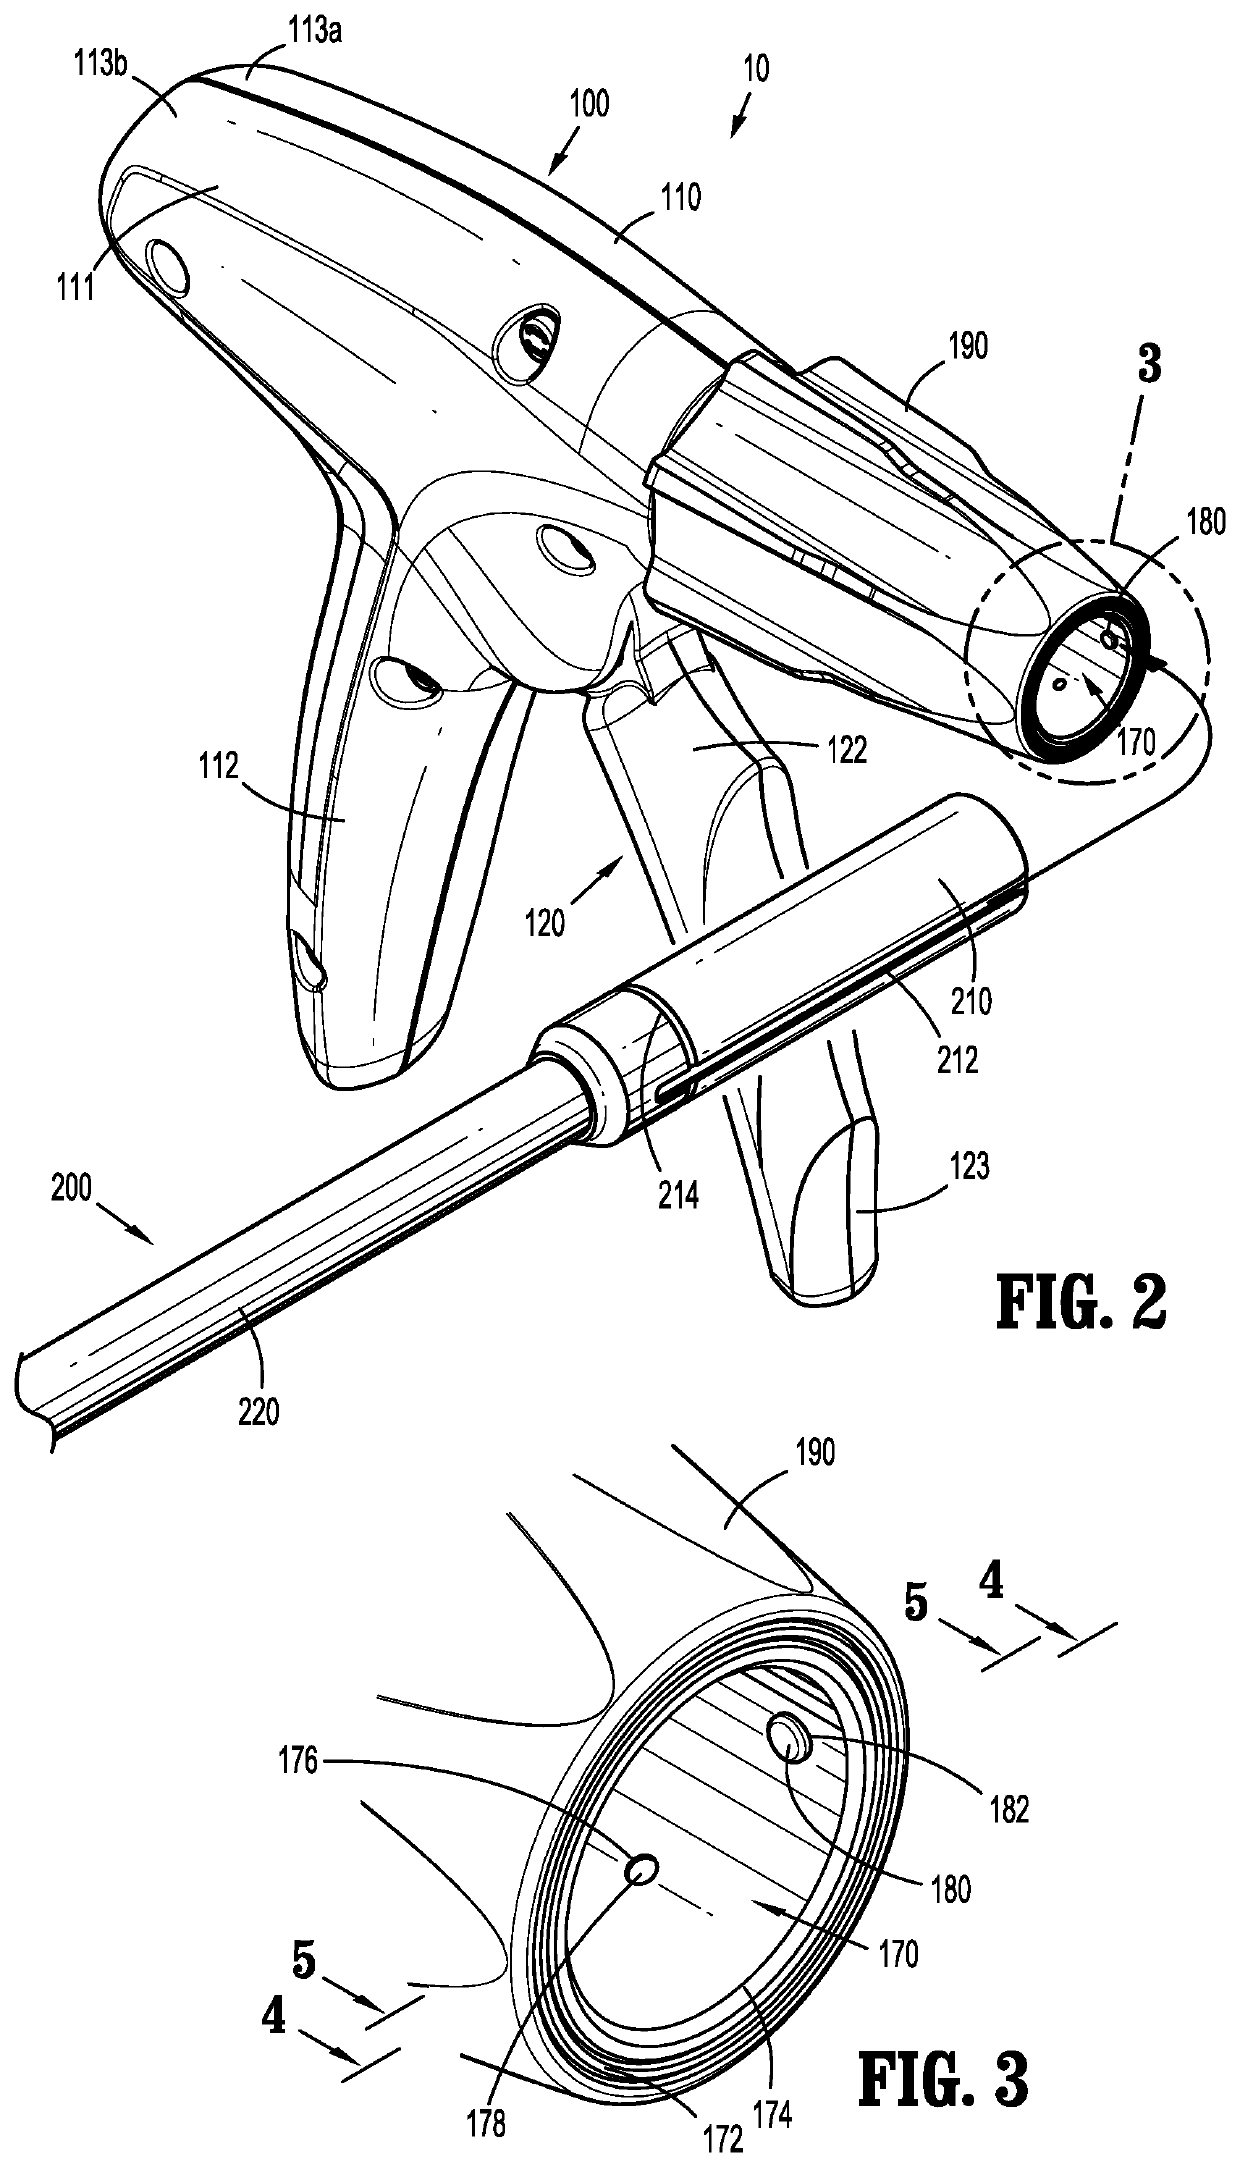 Endoscopic surgical instrument and handle assemblies for use therewith